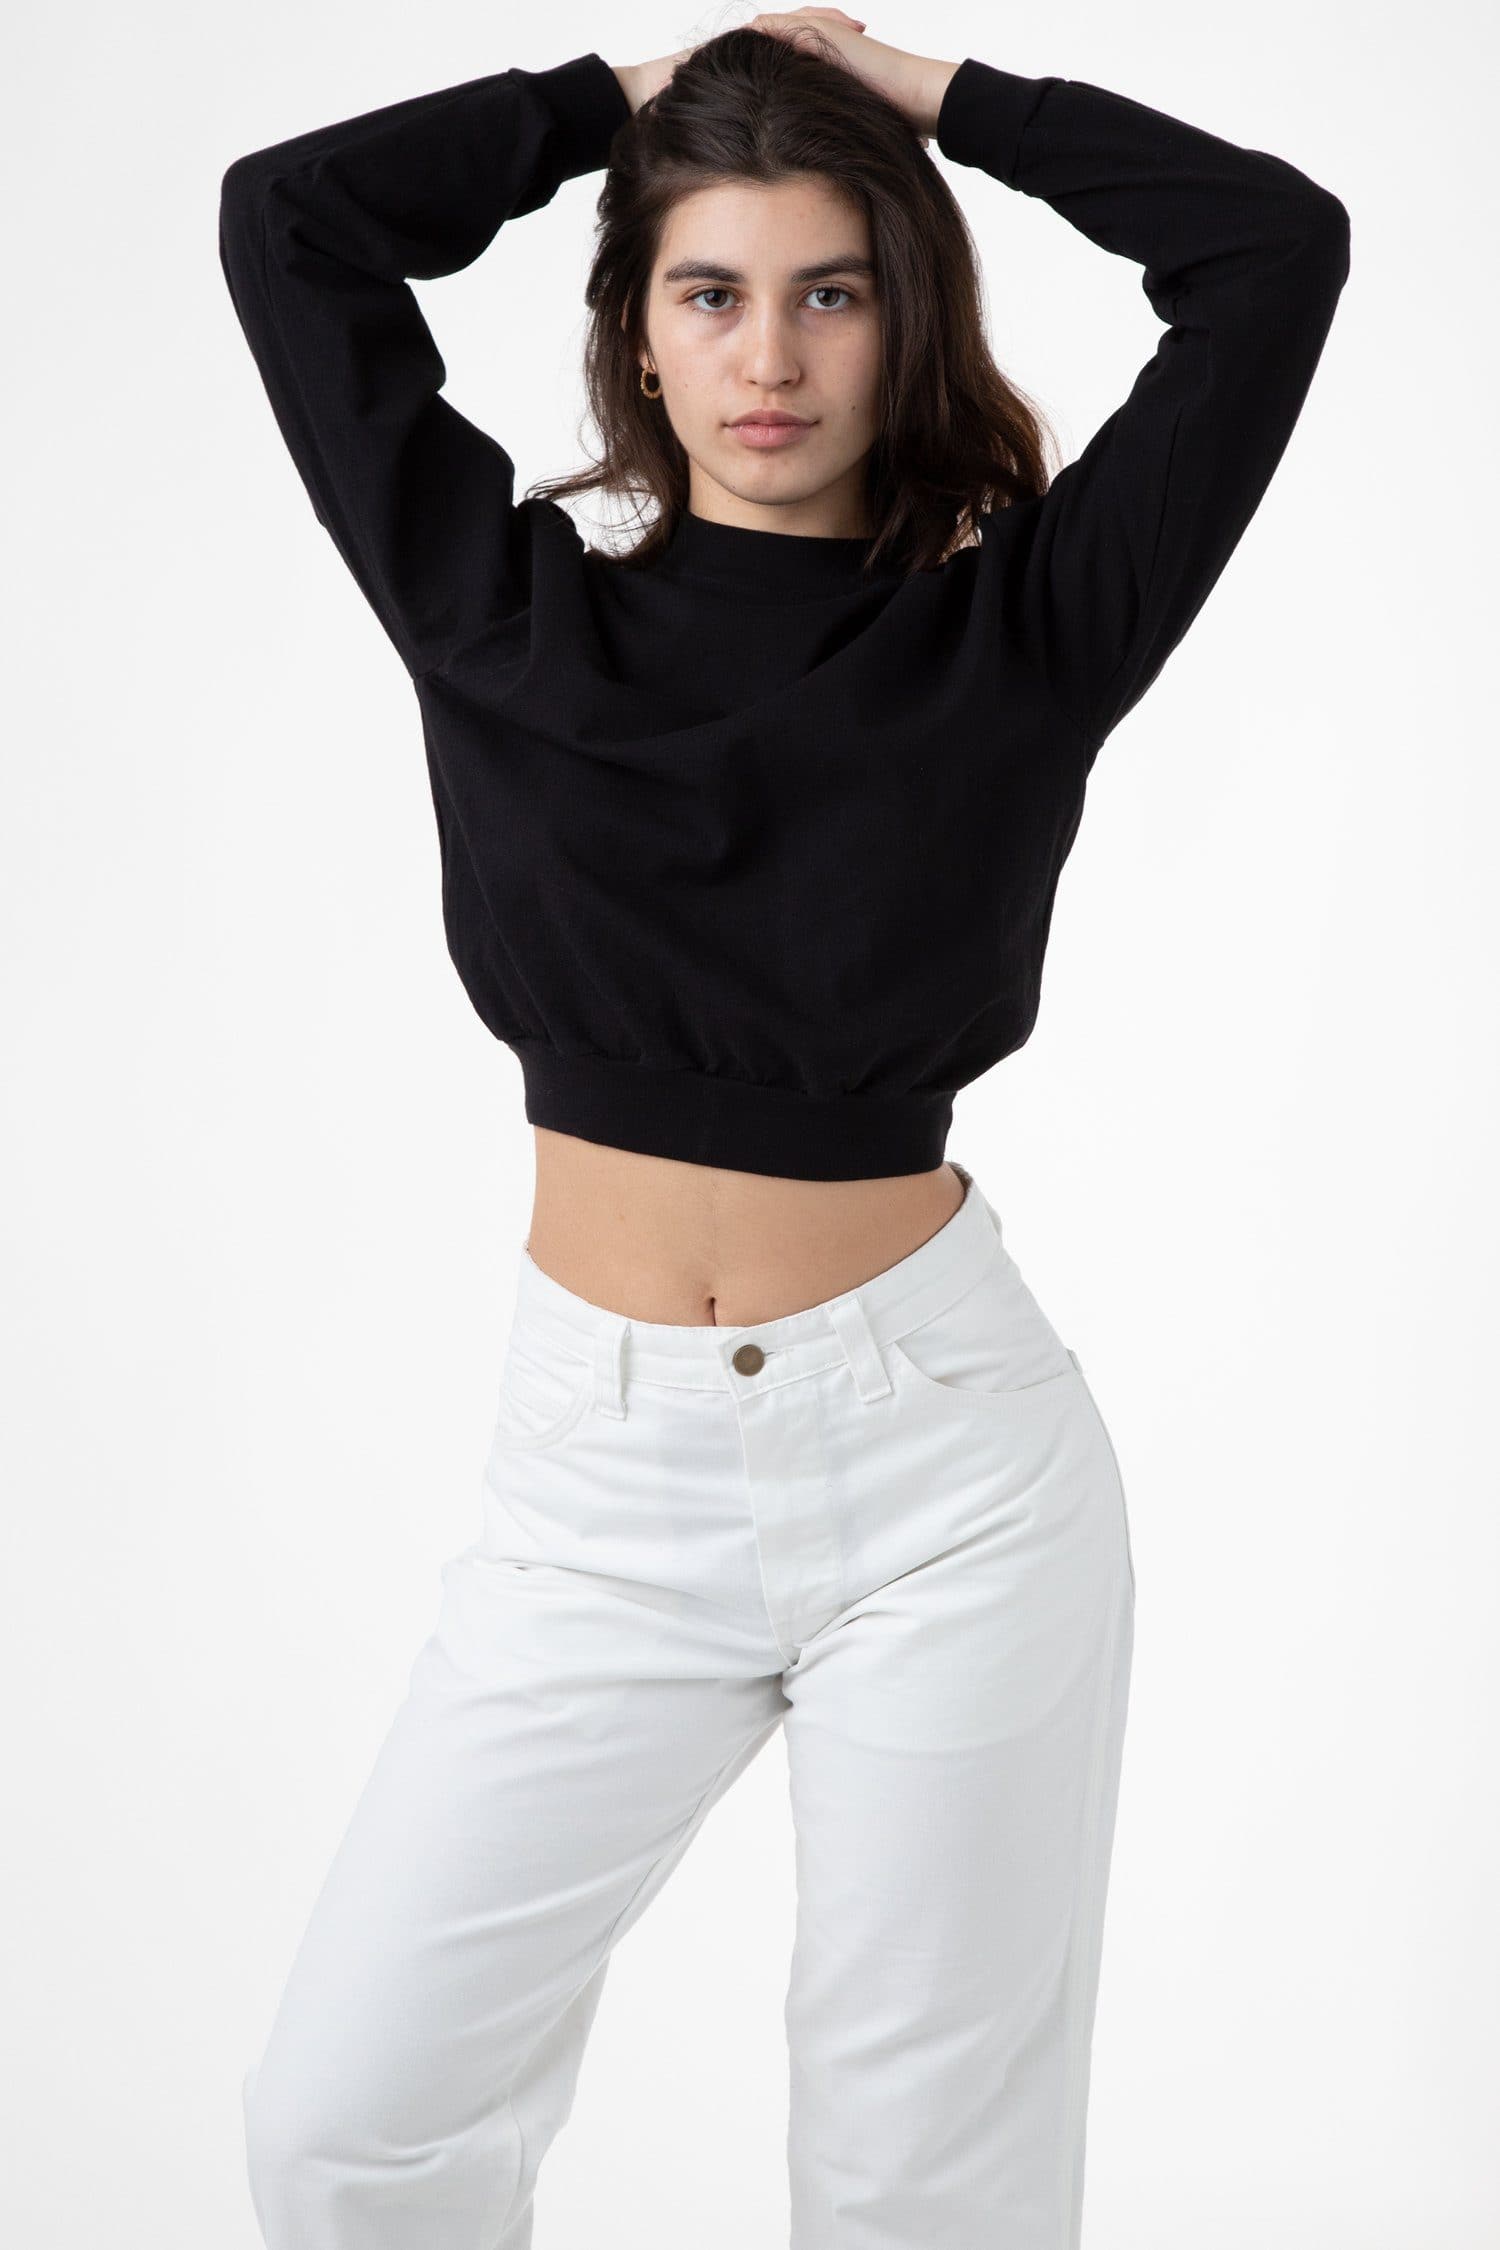 Los Angeles Apparel | Long Sleeve Garment Dye Cropped Mockneck for Women in White, Size Small